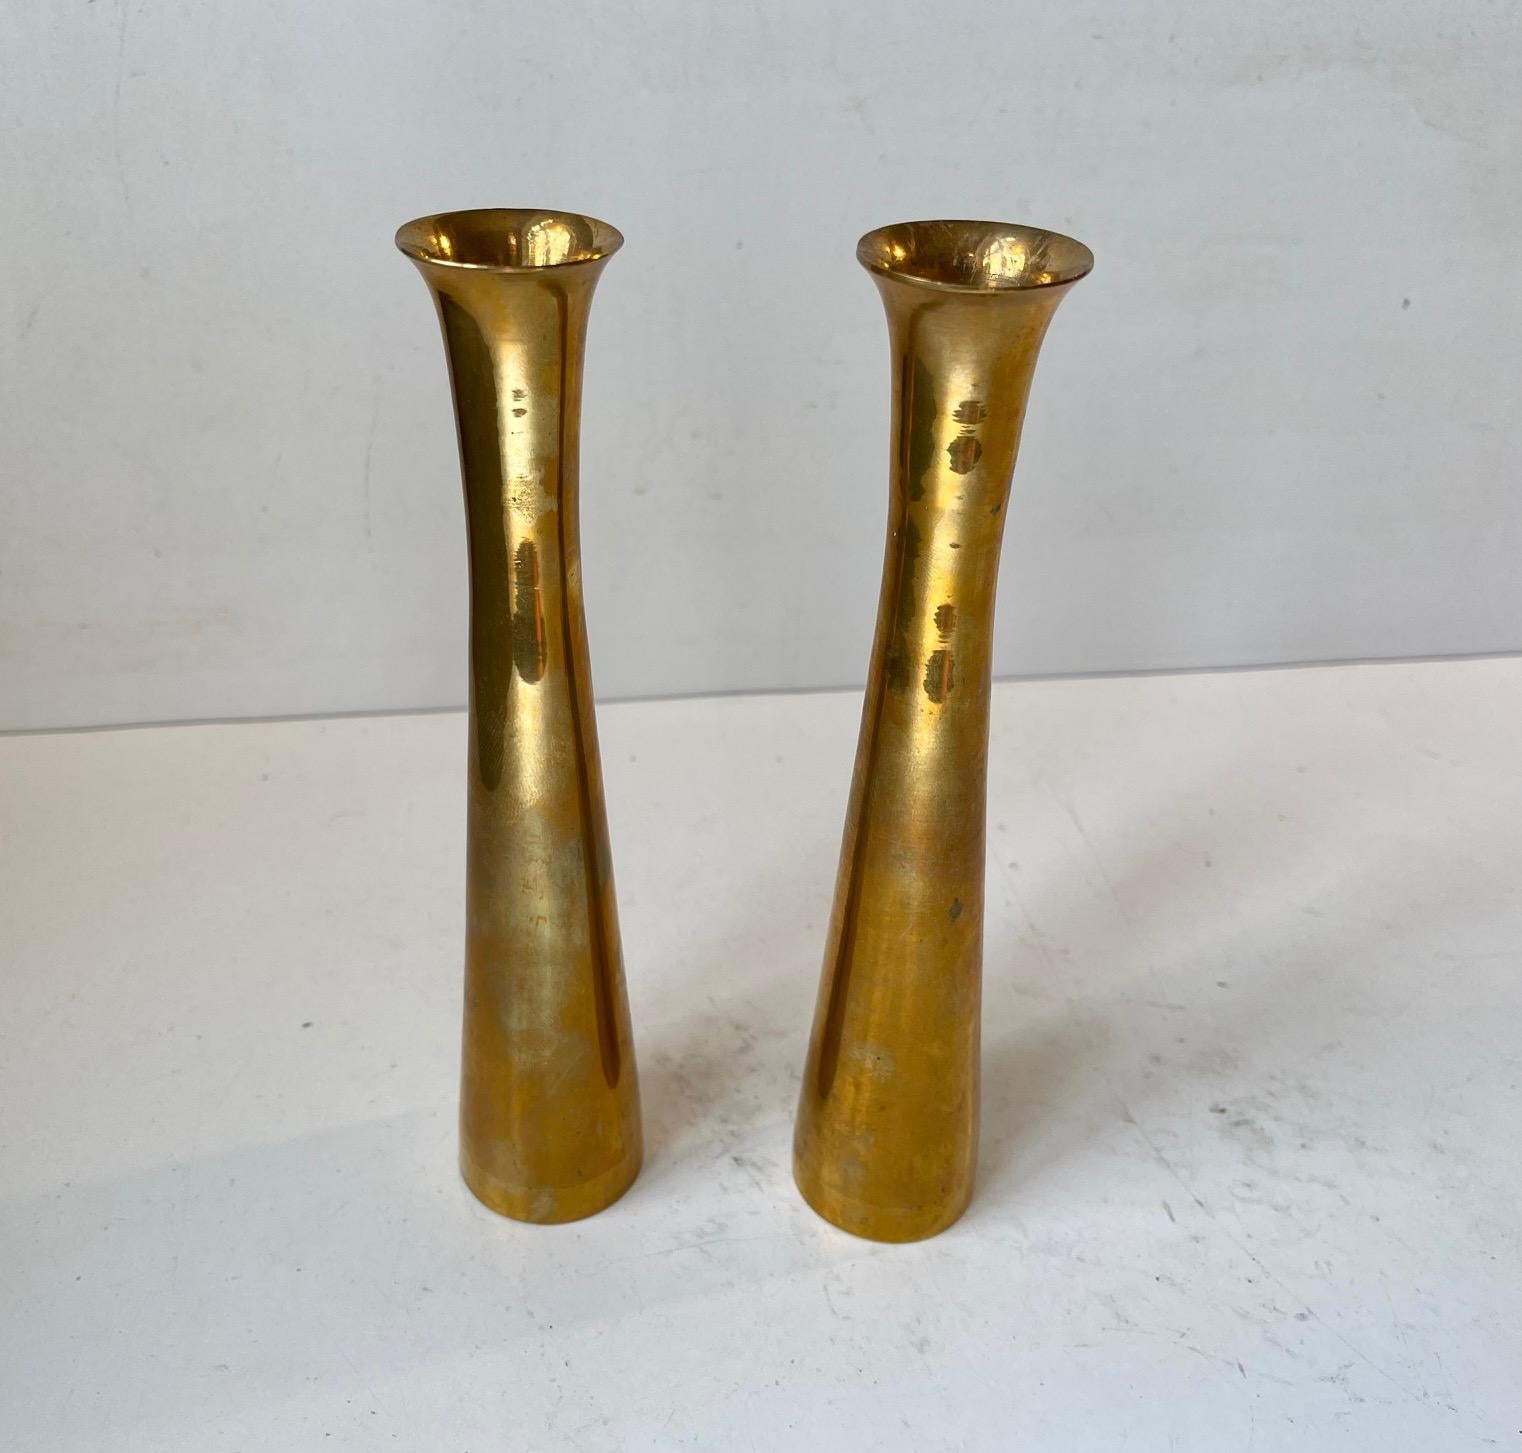 A pair of trumpet shaped brass candlesticks designed and manufactured in Scandinavia during the 1960s. The candlesticks are to be fitted with regular sixed candles. They have not been polished recently and display patina. The style of this set is